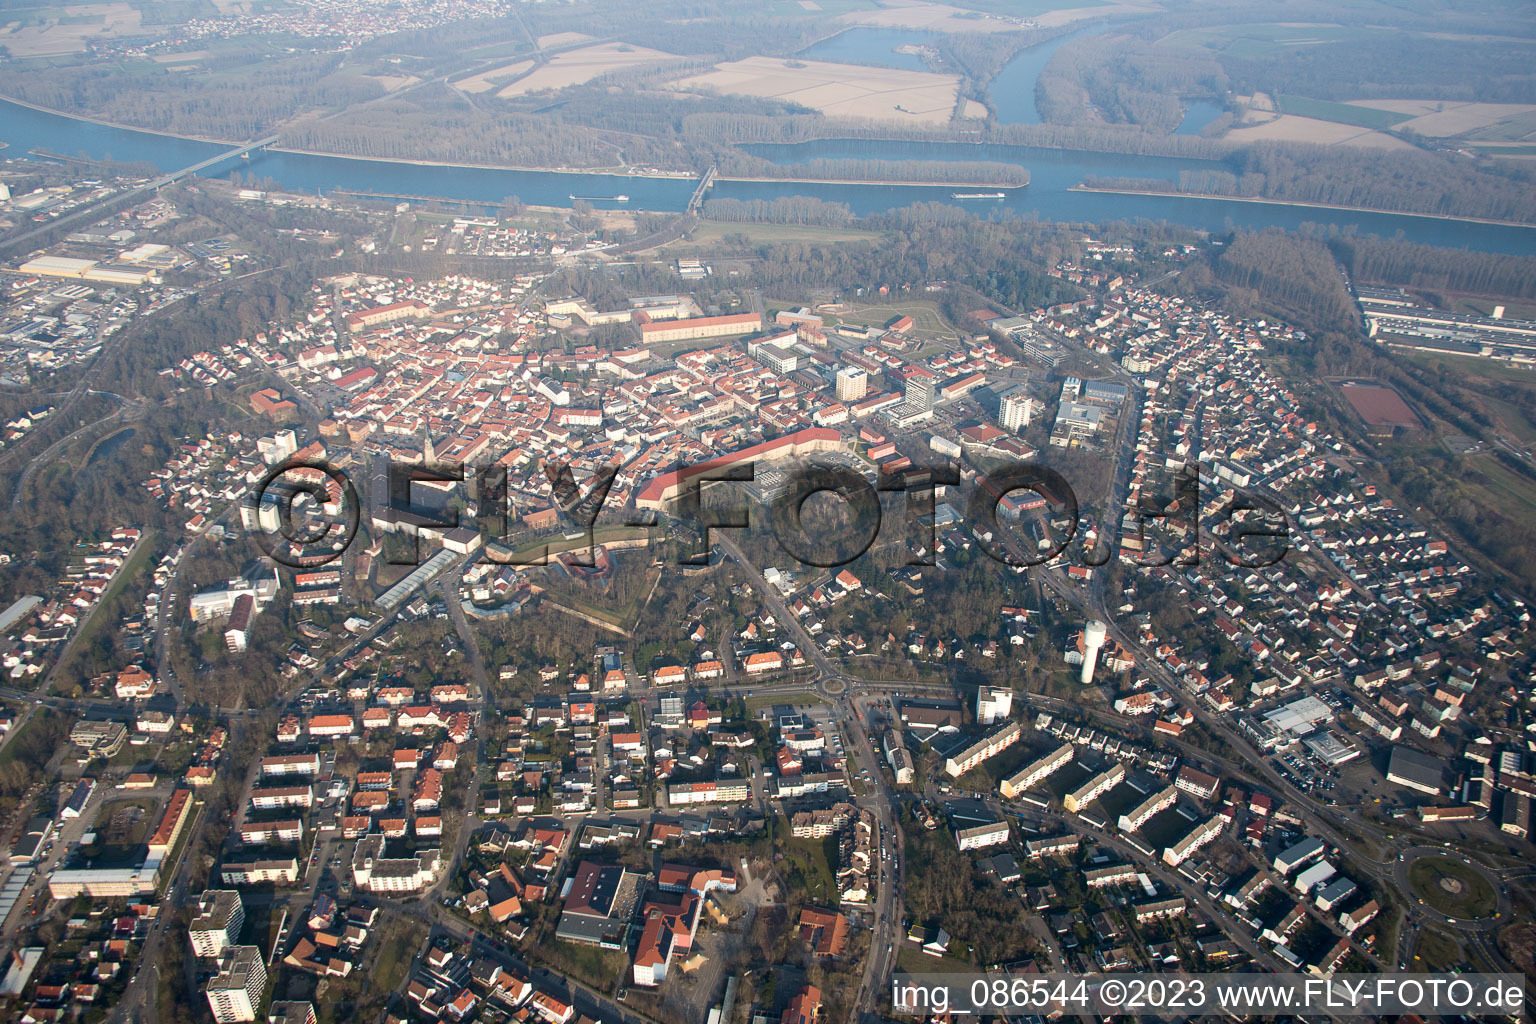 Germersheim in the state Rhineland-Palatinate, Germany from the plane